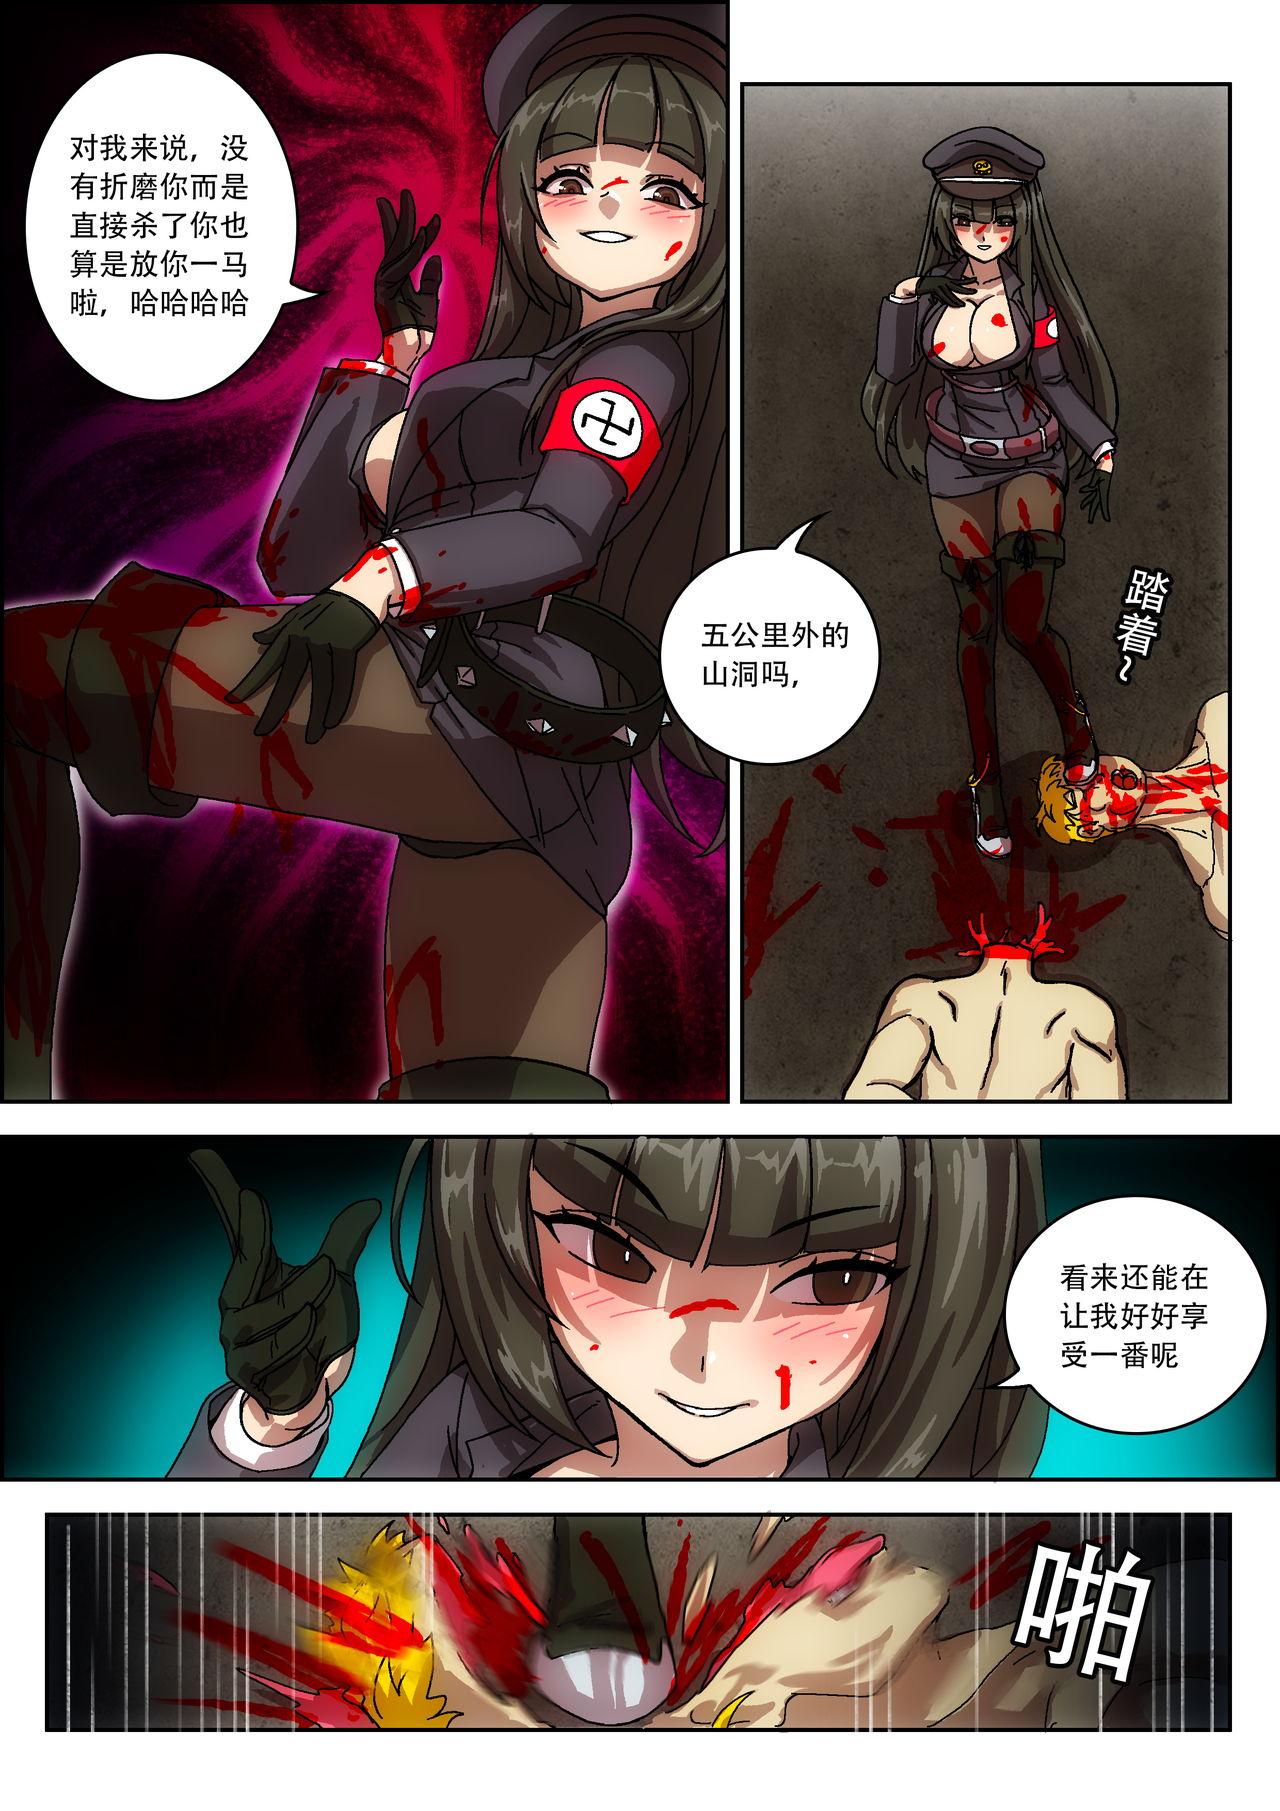 [Weixiefashi] Empire executioner Alice-sama's thigh-high boots trampling crushing torturing session full colour [帝国处刑官爱丽丝大人的长靴踩杀拷问][全彩] 23